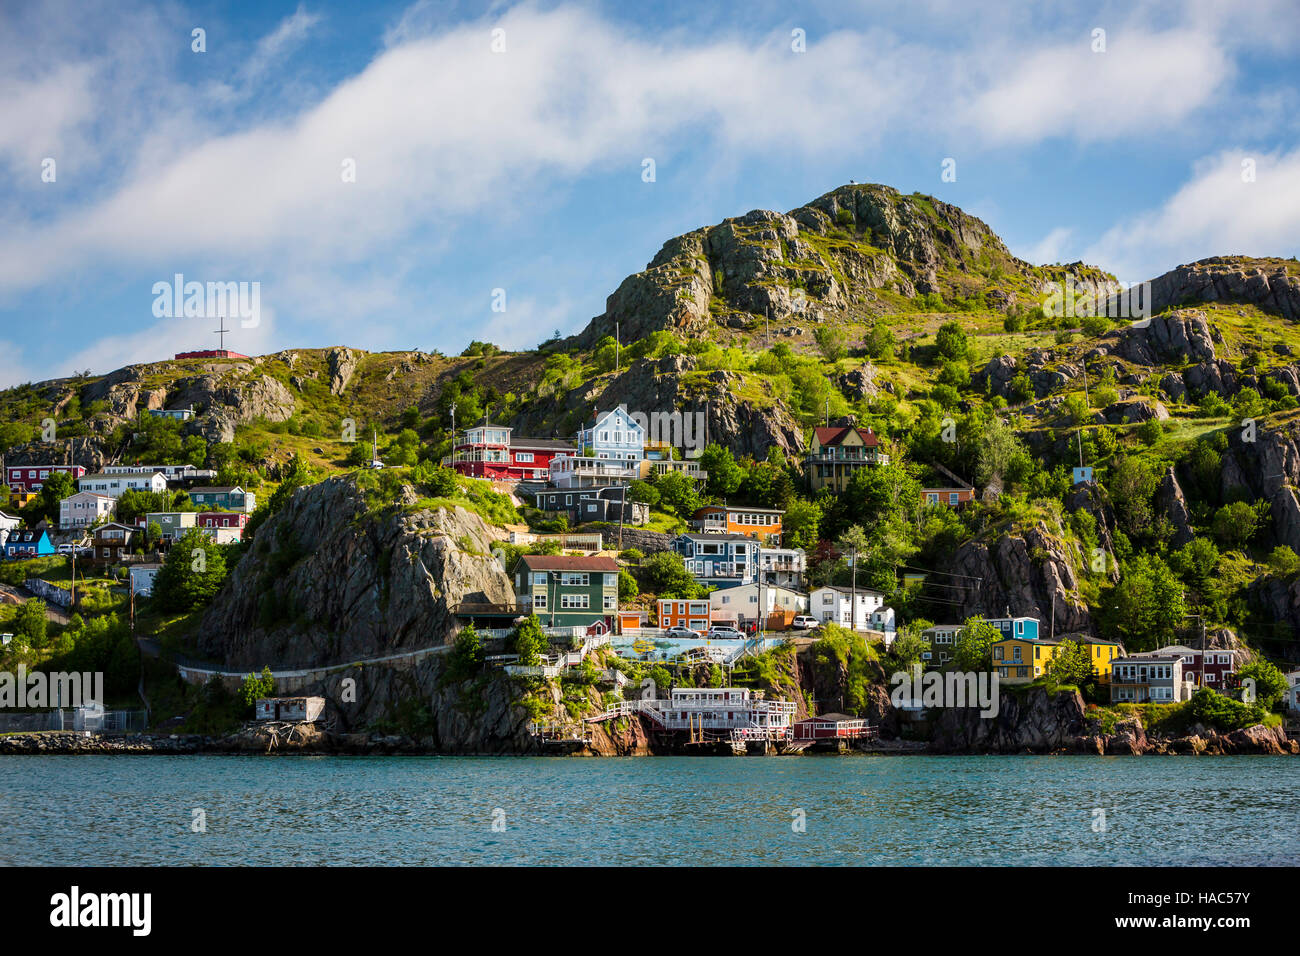 The battery neighborhood on the slopes of Signal Hill in St. John's Newfoundland and Labrador, Canada. Stock Photo